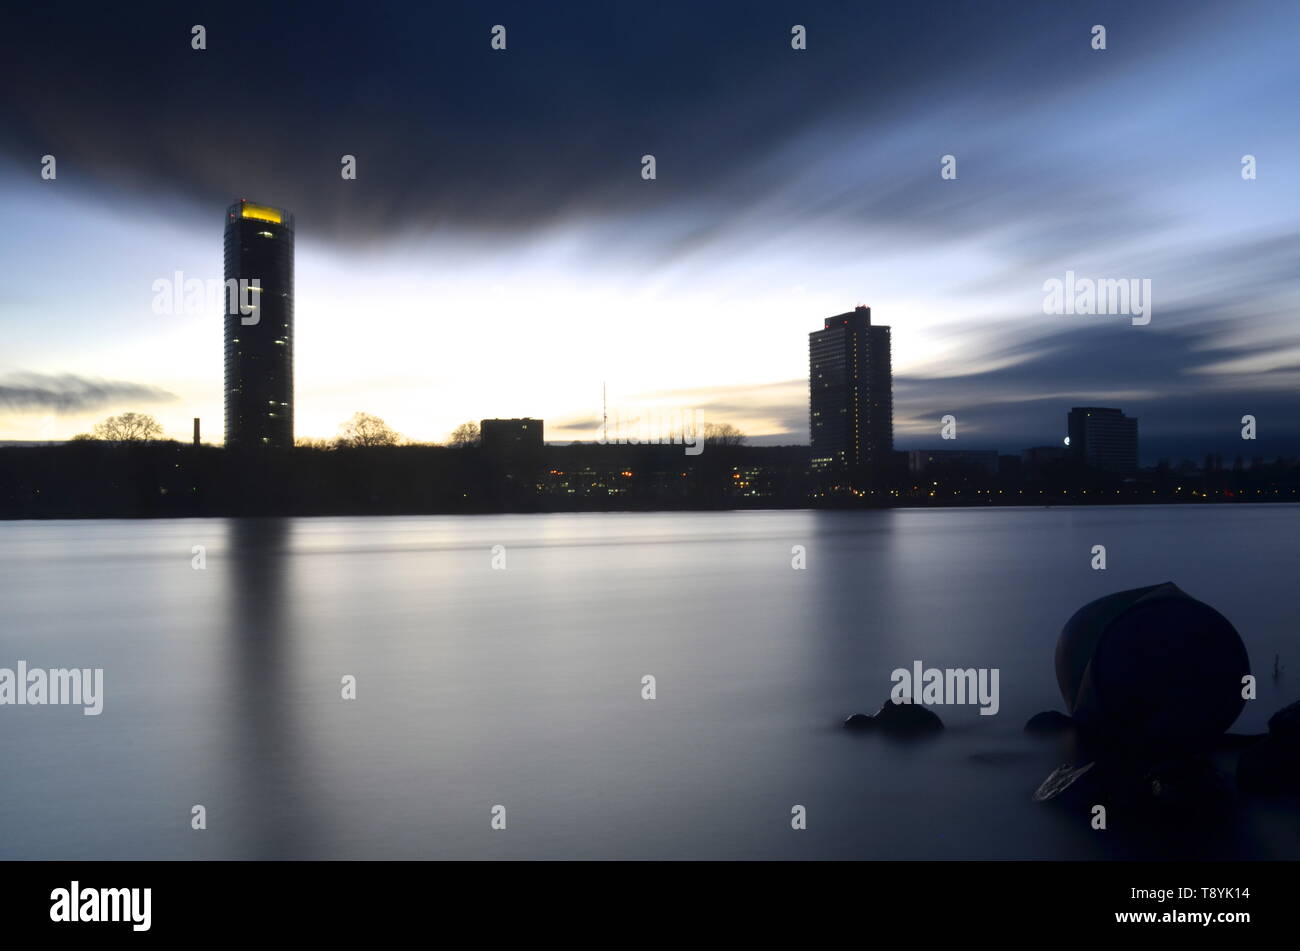 Bonn city skyline seen from rhine river, long exposure clouds, at dusk Stock Photo